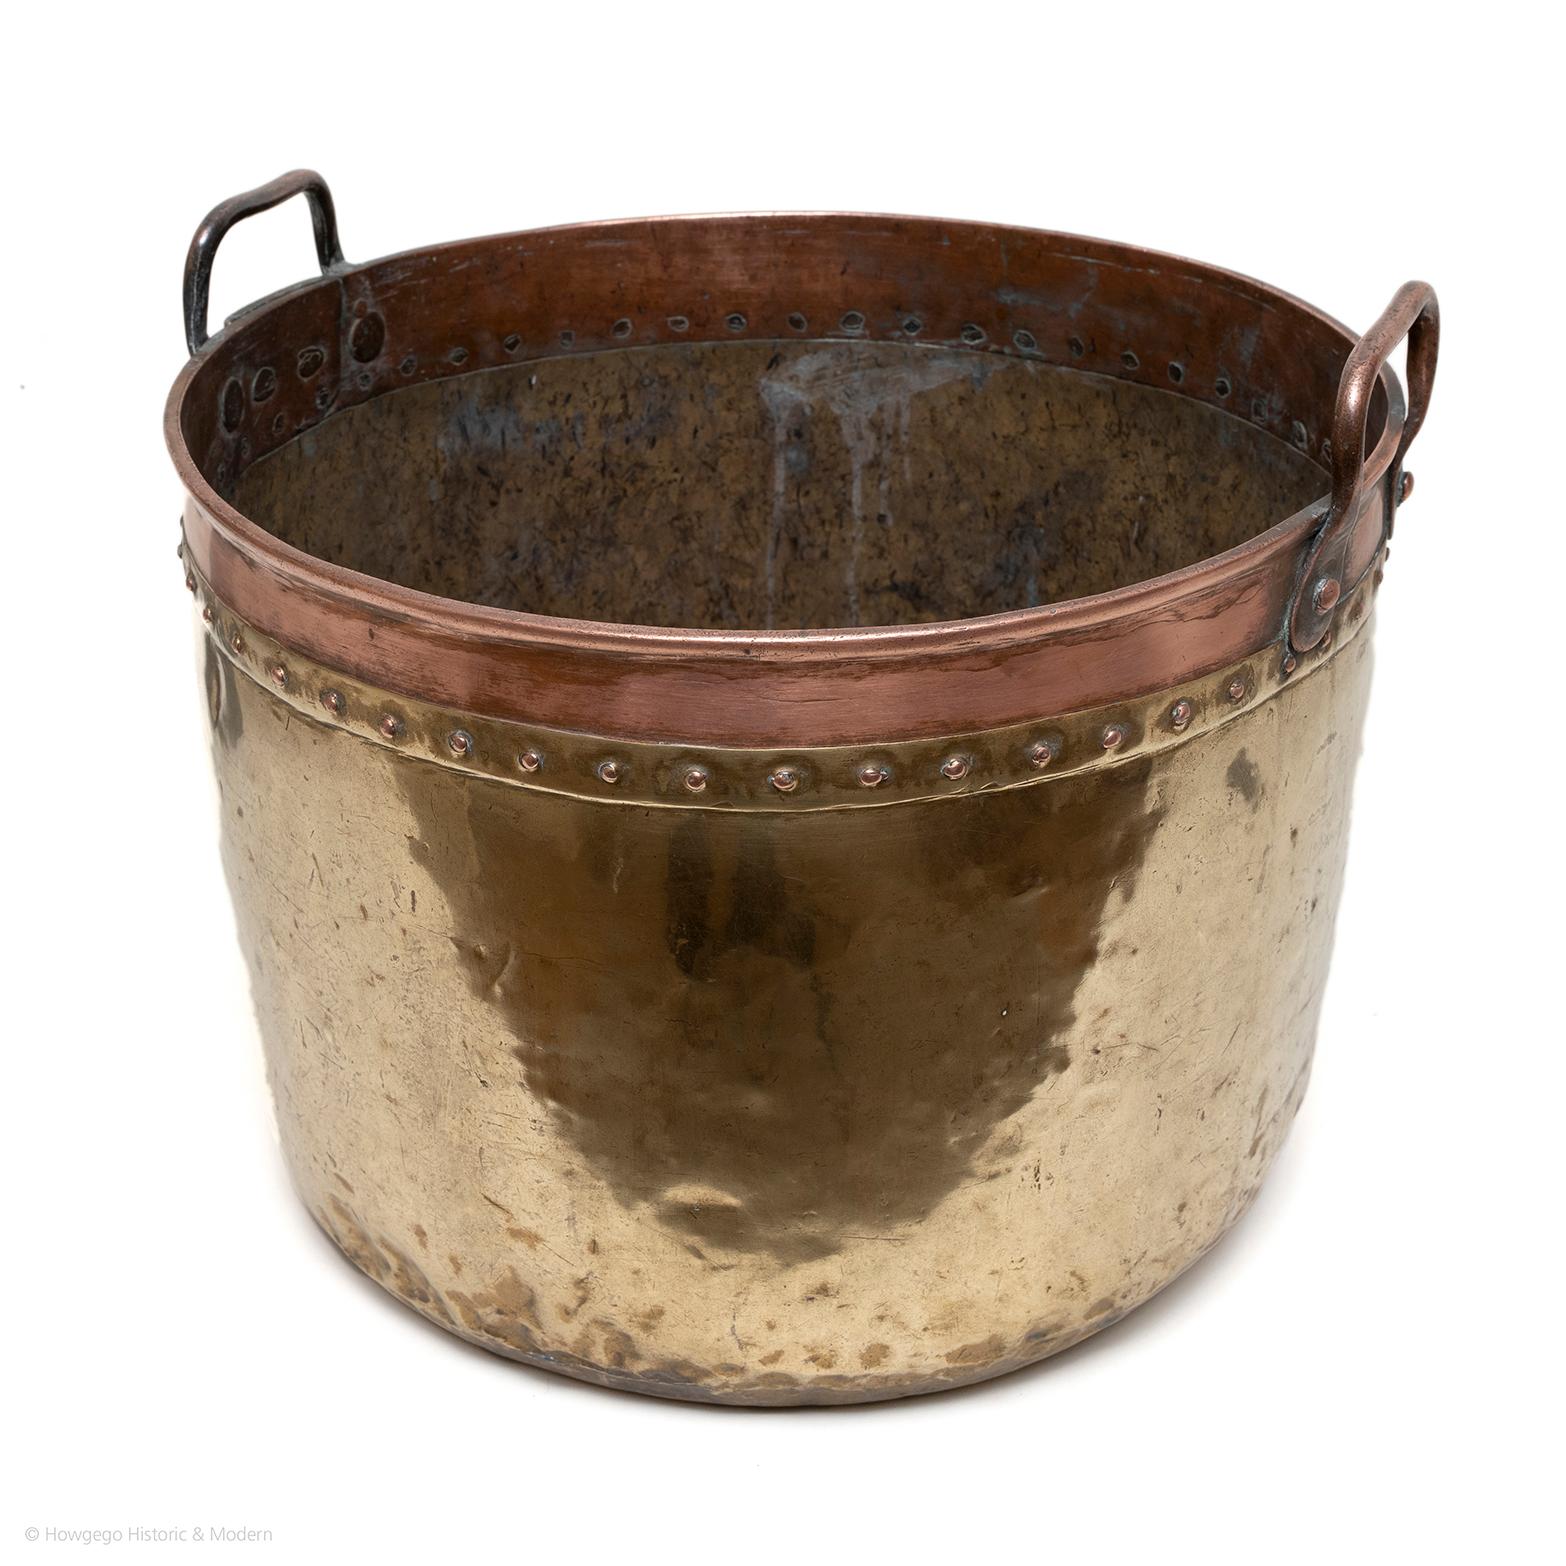 Unusual with the copper band which is highly decorative elevating the calibre of this log bin.
Holds a large quantity of large logs or coal.
Suitable for everyday use.
Could be re-purposed as a jardiniere or wine cooler for a party.

An upper band